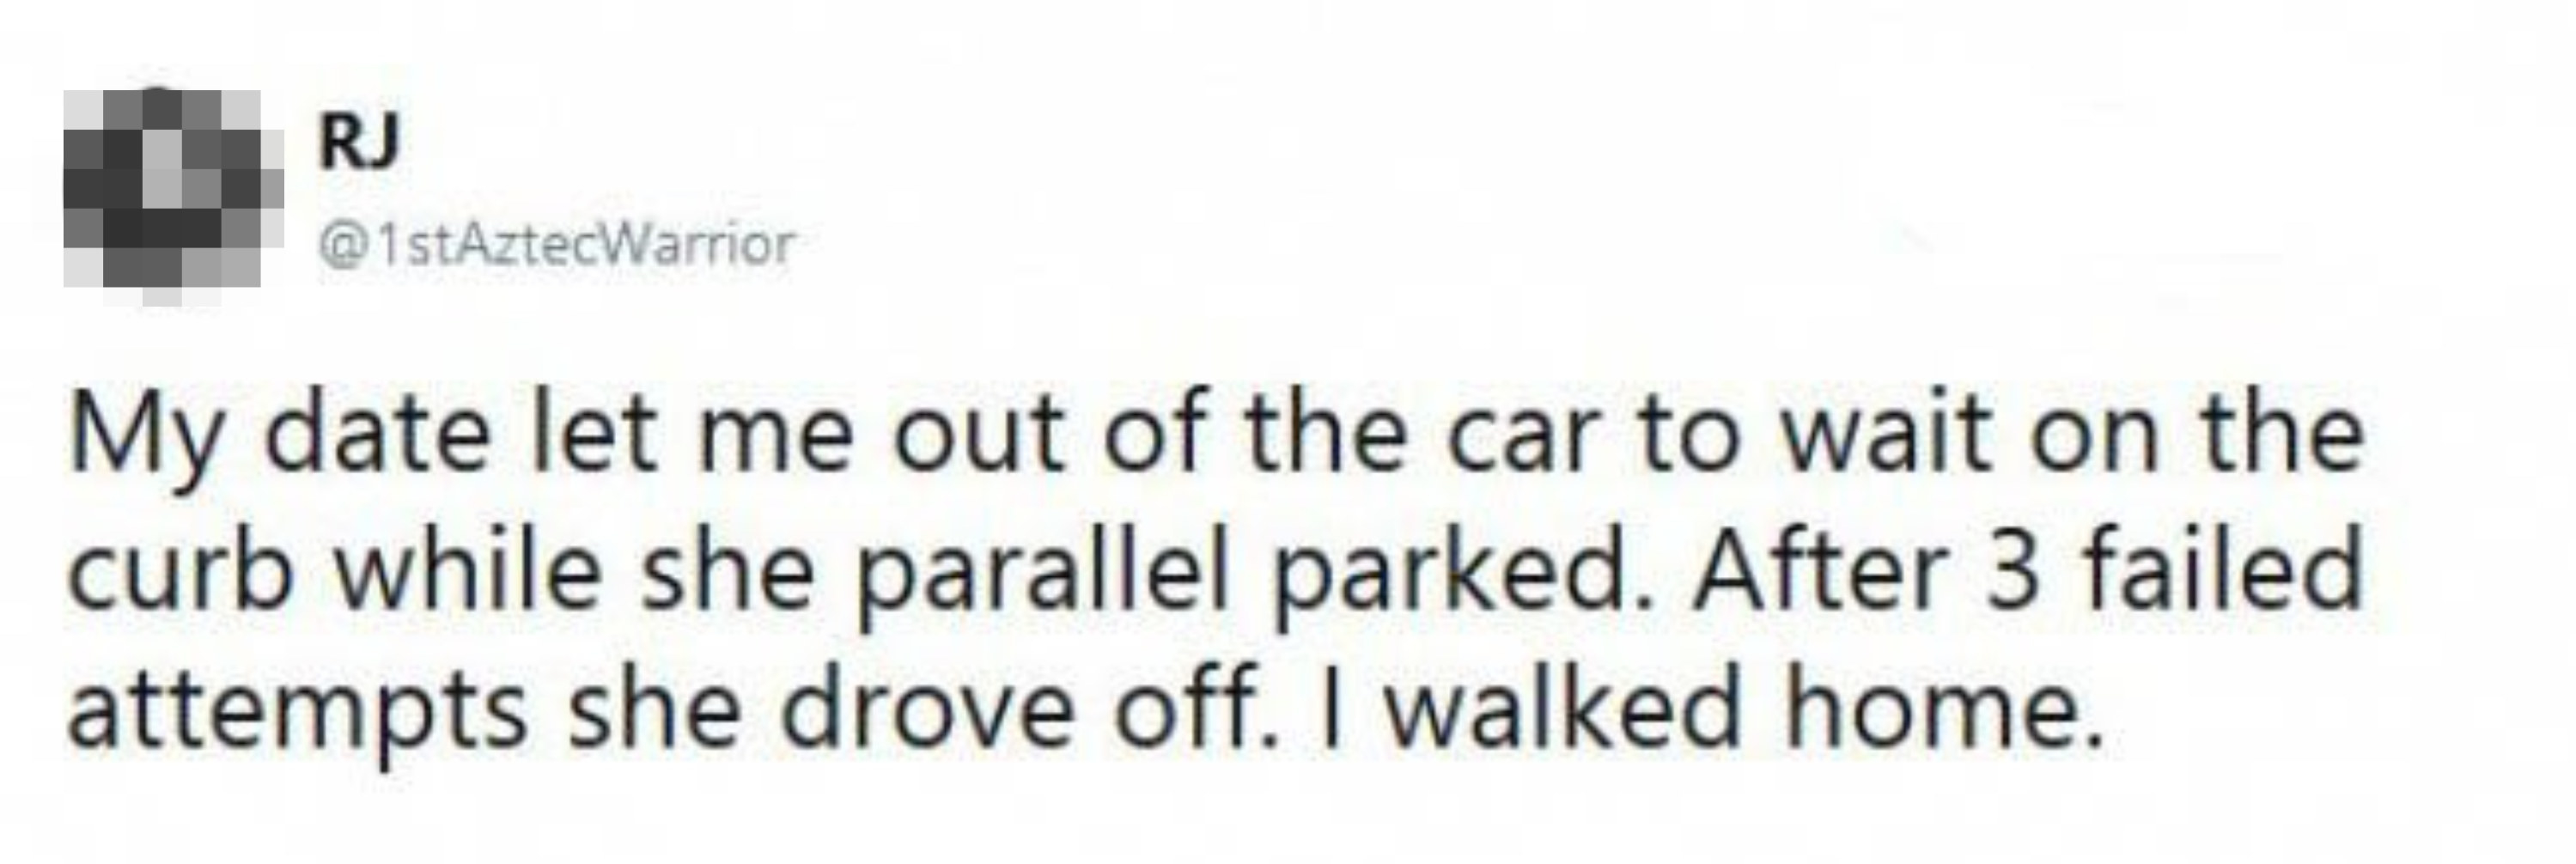 Tweet reading, &quot;My date let me out of the car to wait on the curb while she parallel parked; after 3 attempts she drove off&quot;